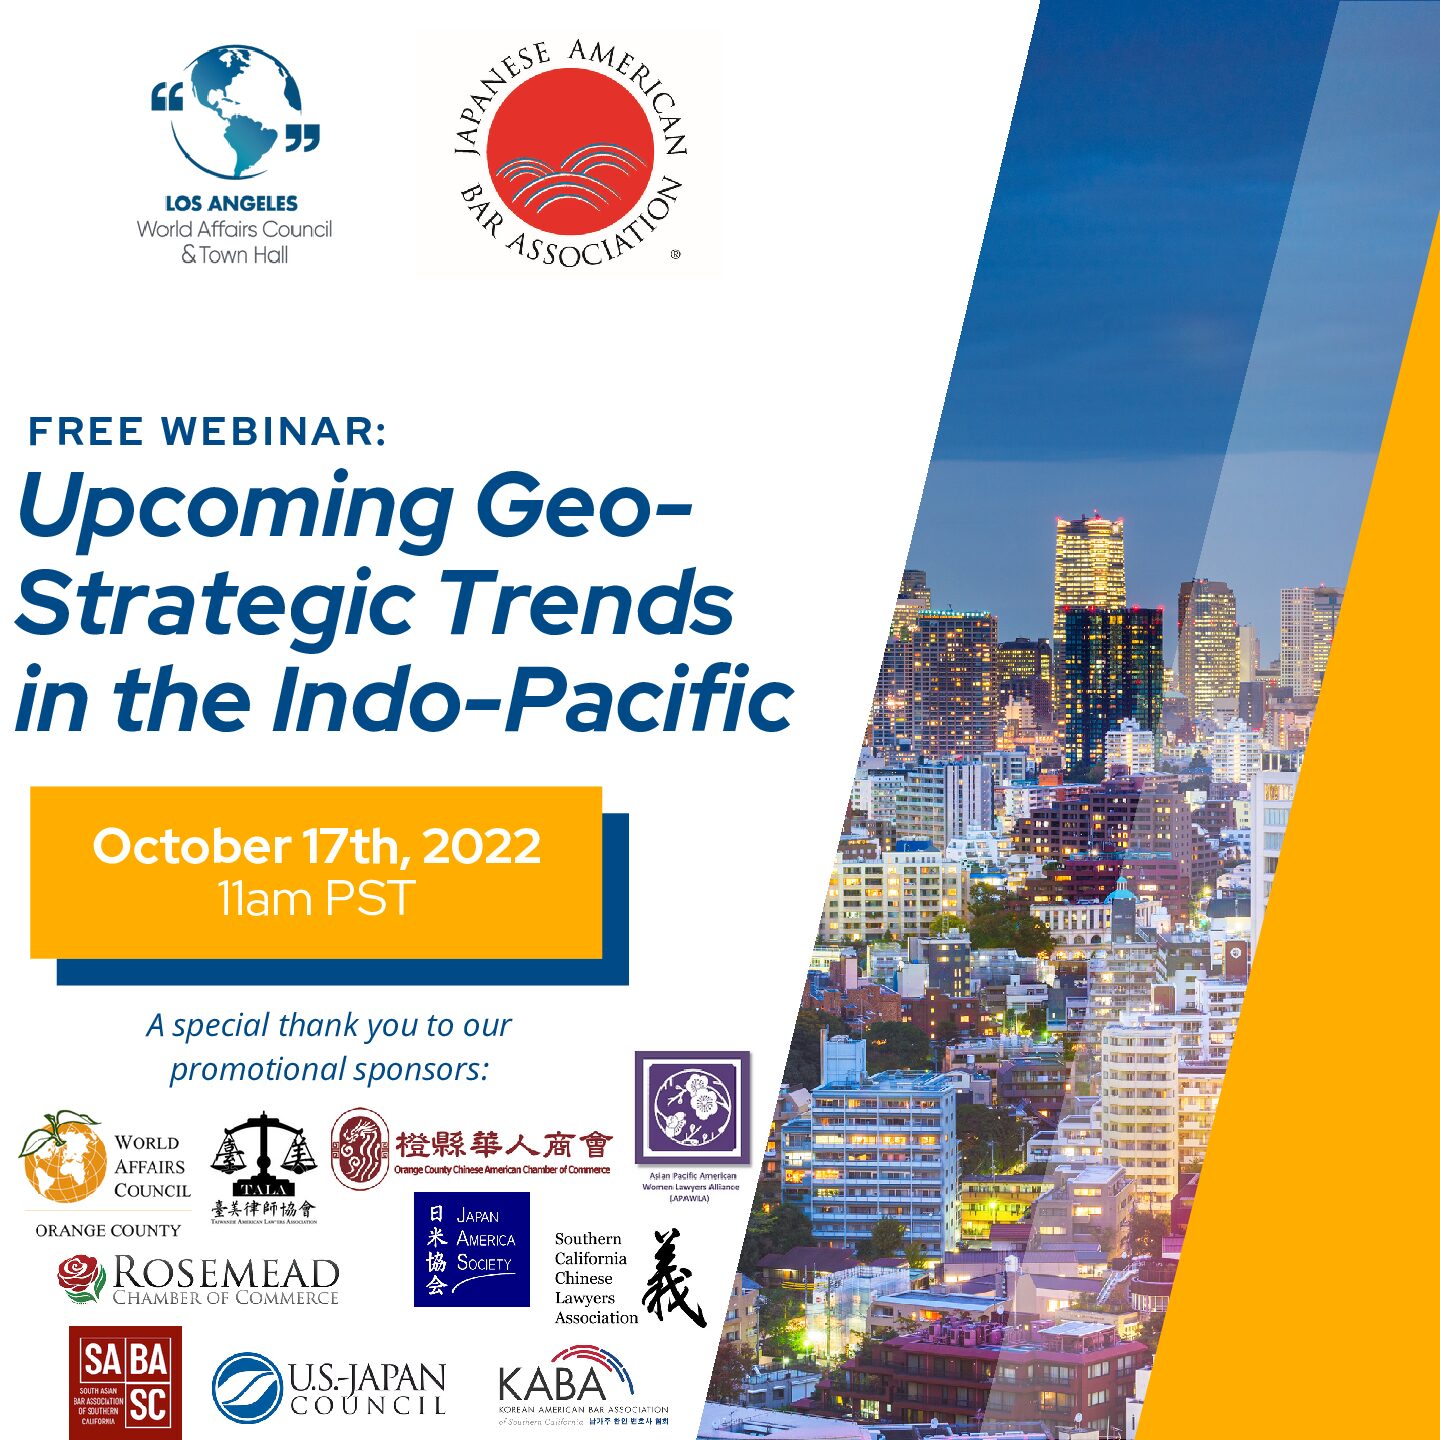 Upcoming Geo-Strategic Trends in the Indo-Pacific